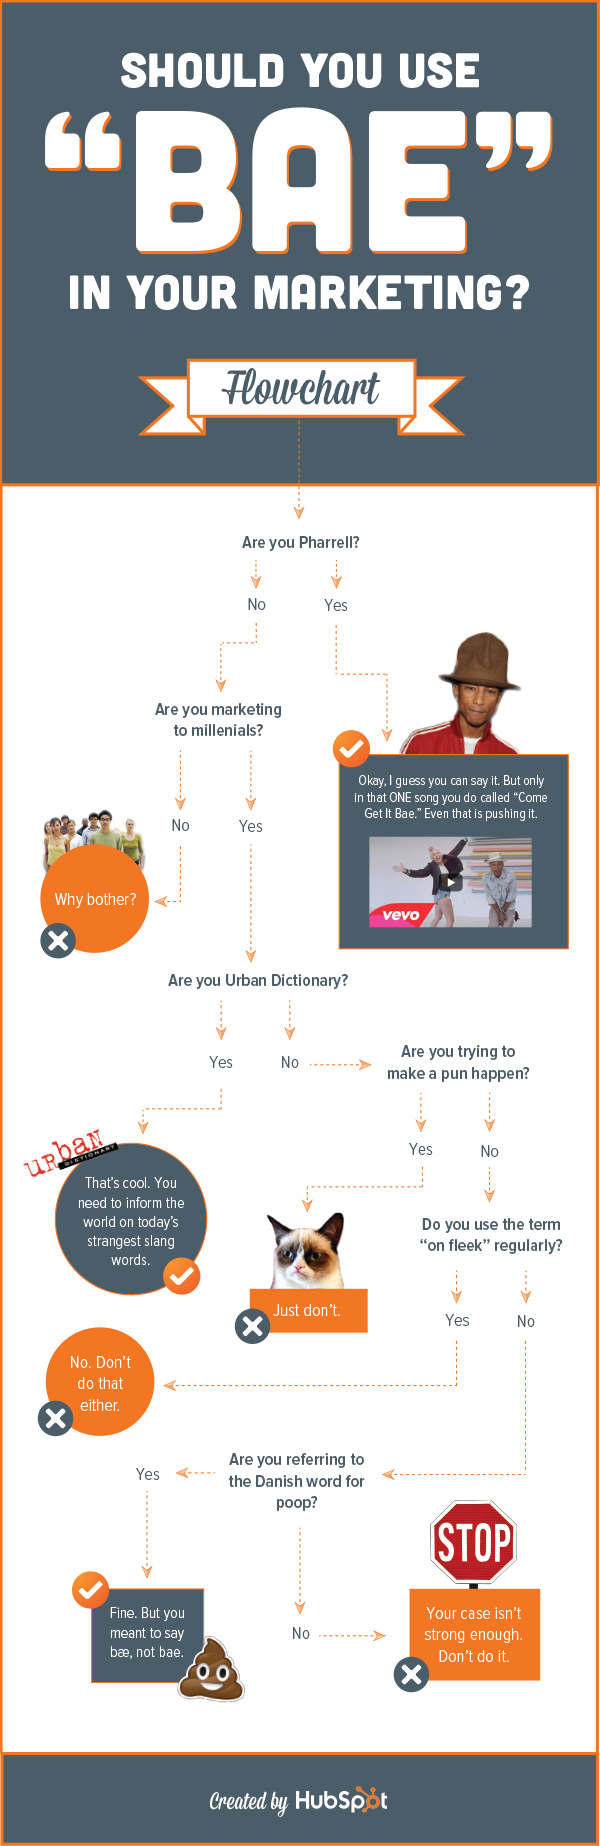 HubSpot flowchart - Should you use "bae" in your marketing?